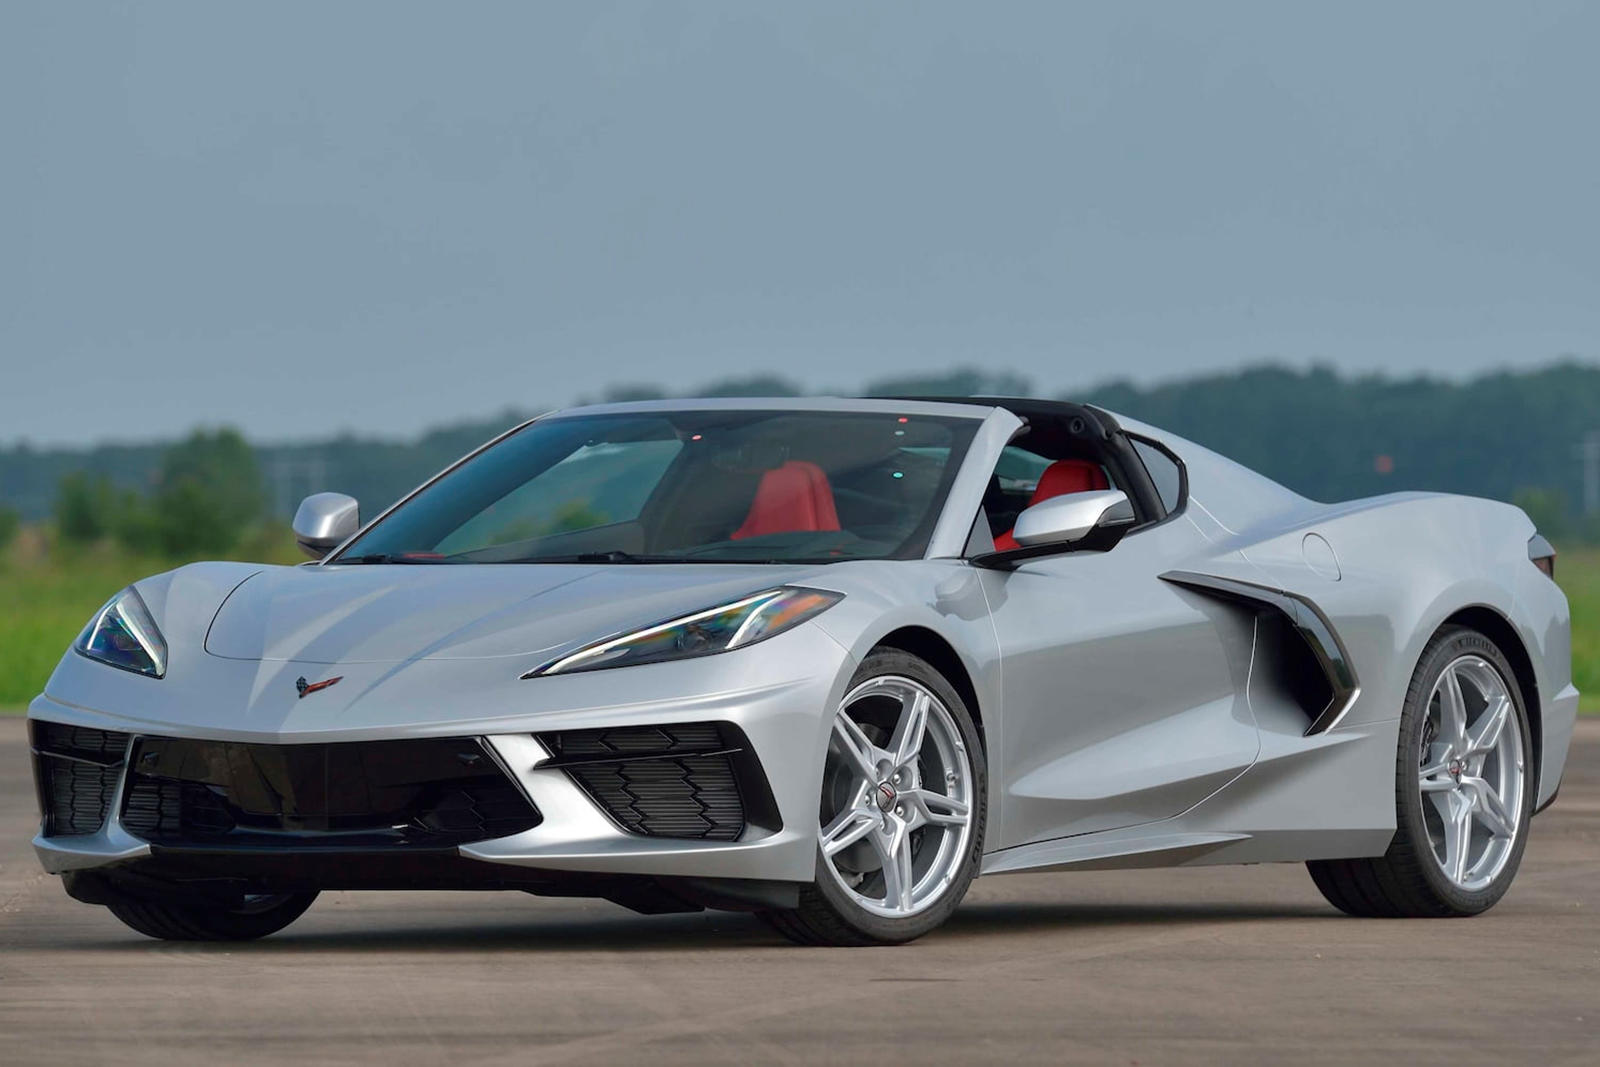 There's Already A 2020 Corvette C8 Up For Auction.